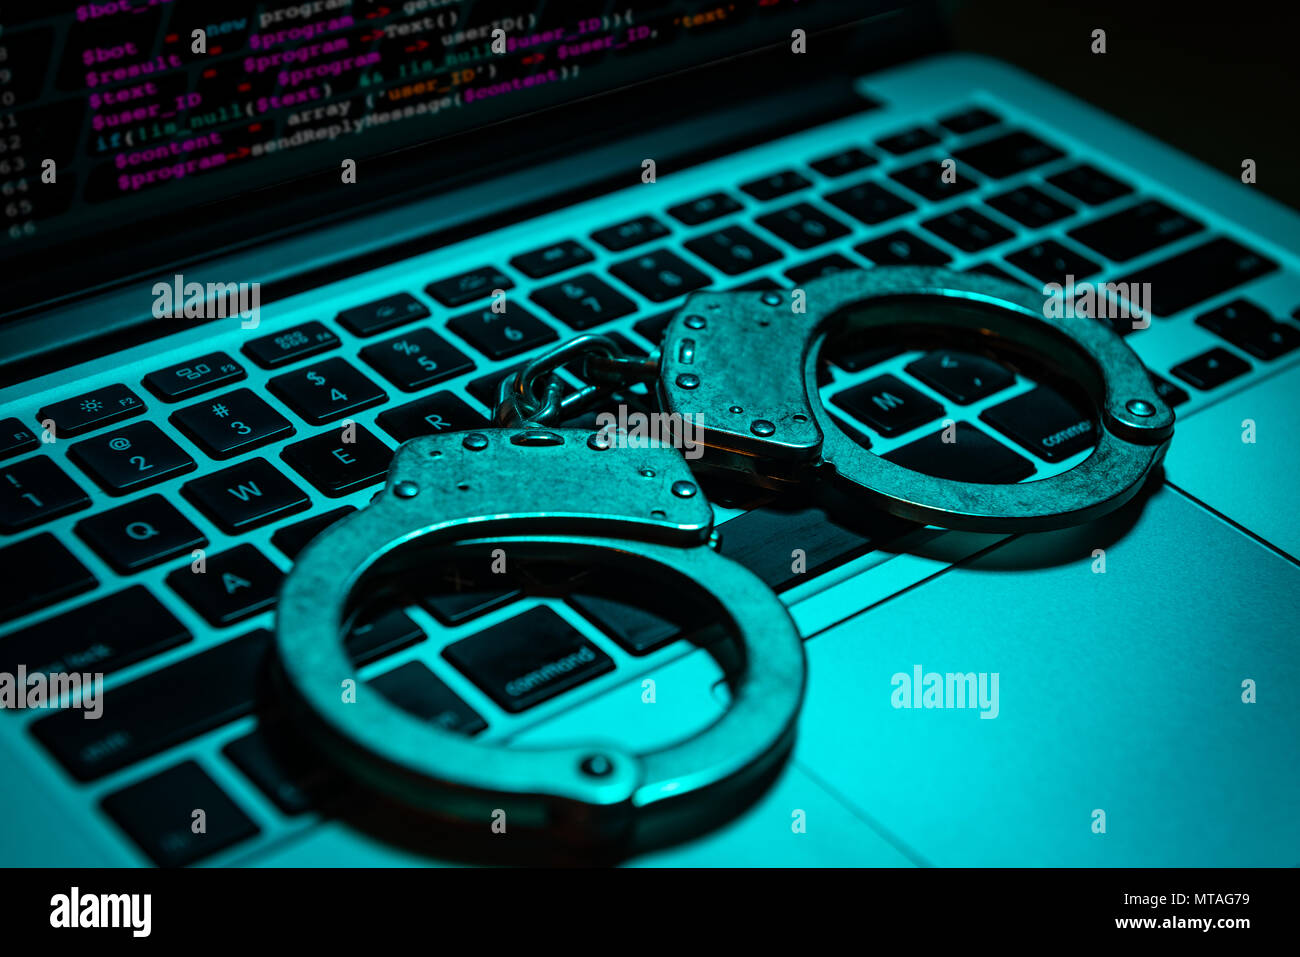 A pair of handcuffs sit atop a laptop keyboard. Technology/cyber crime concept. Stock Photo